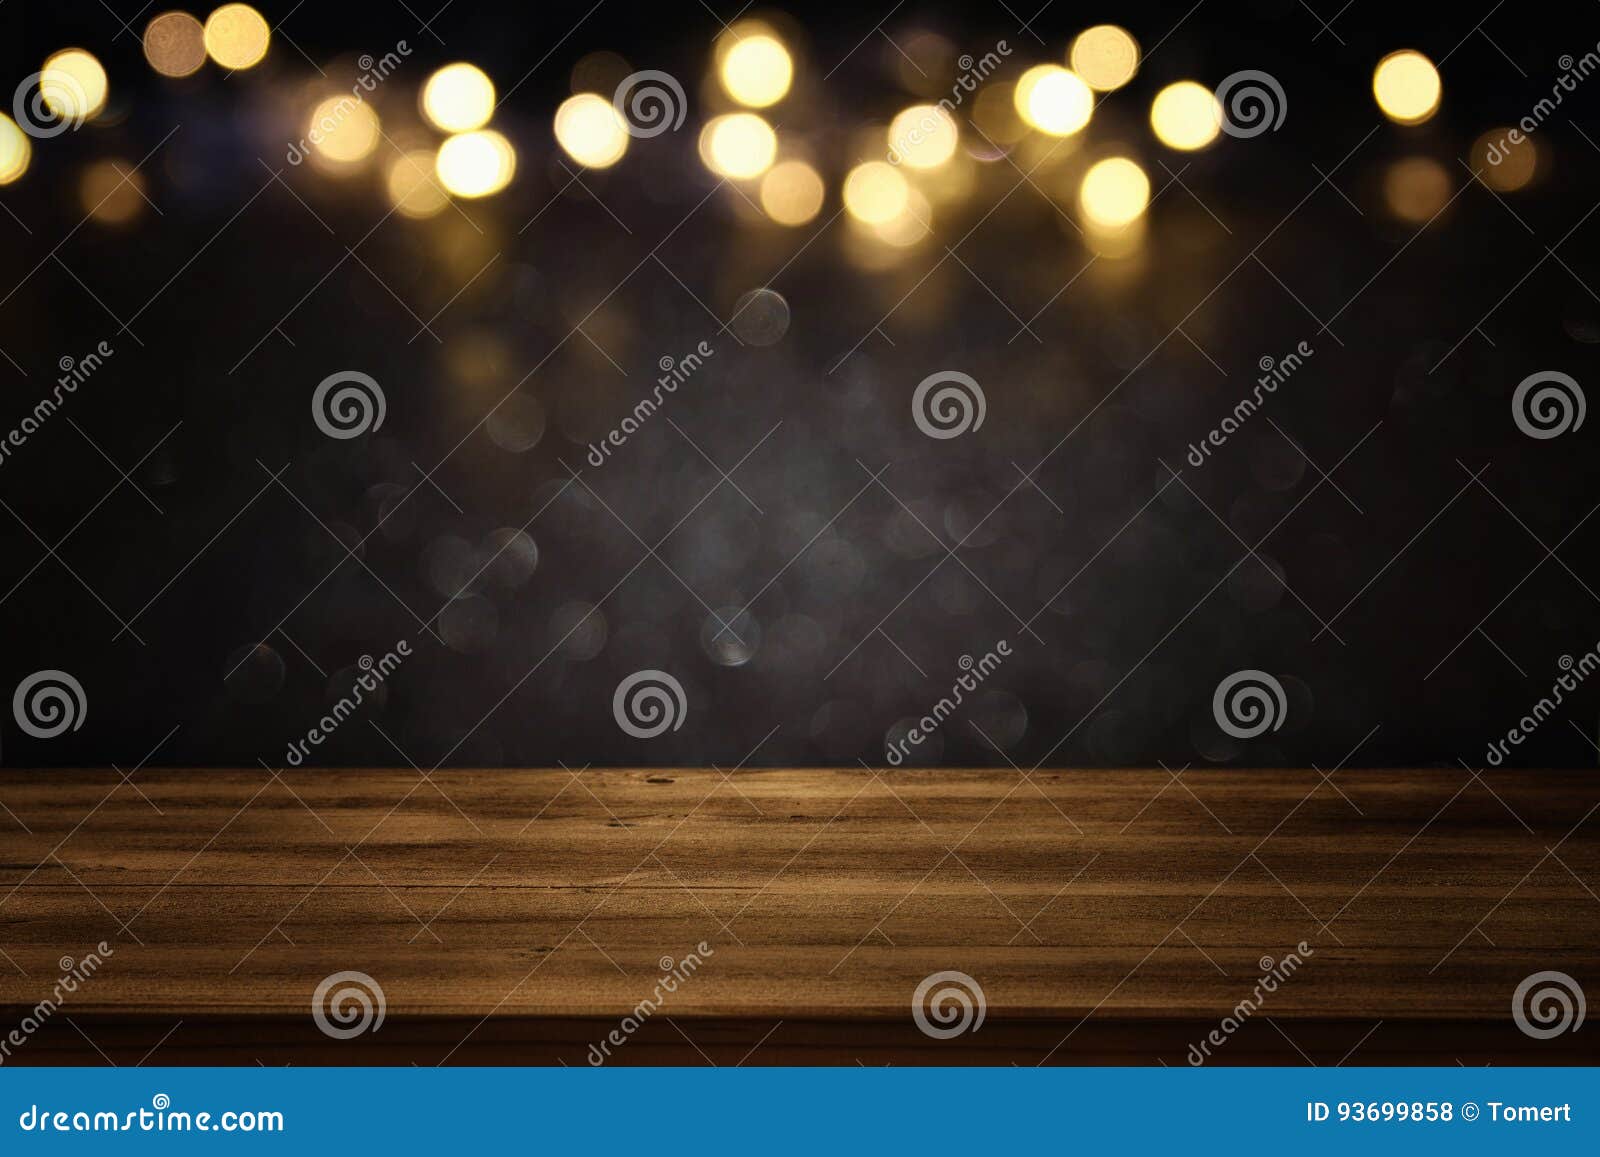 empty table in front of black and gold glitter lights background